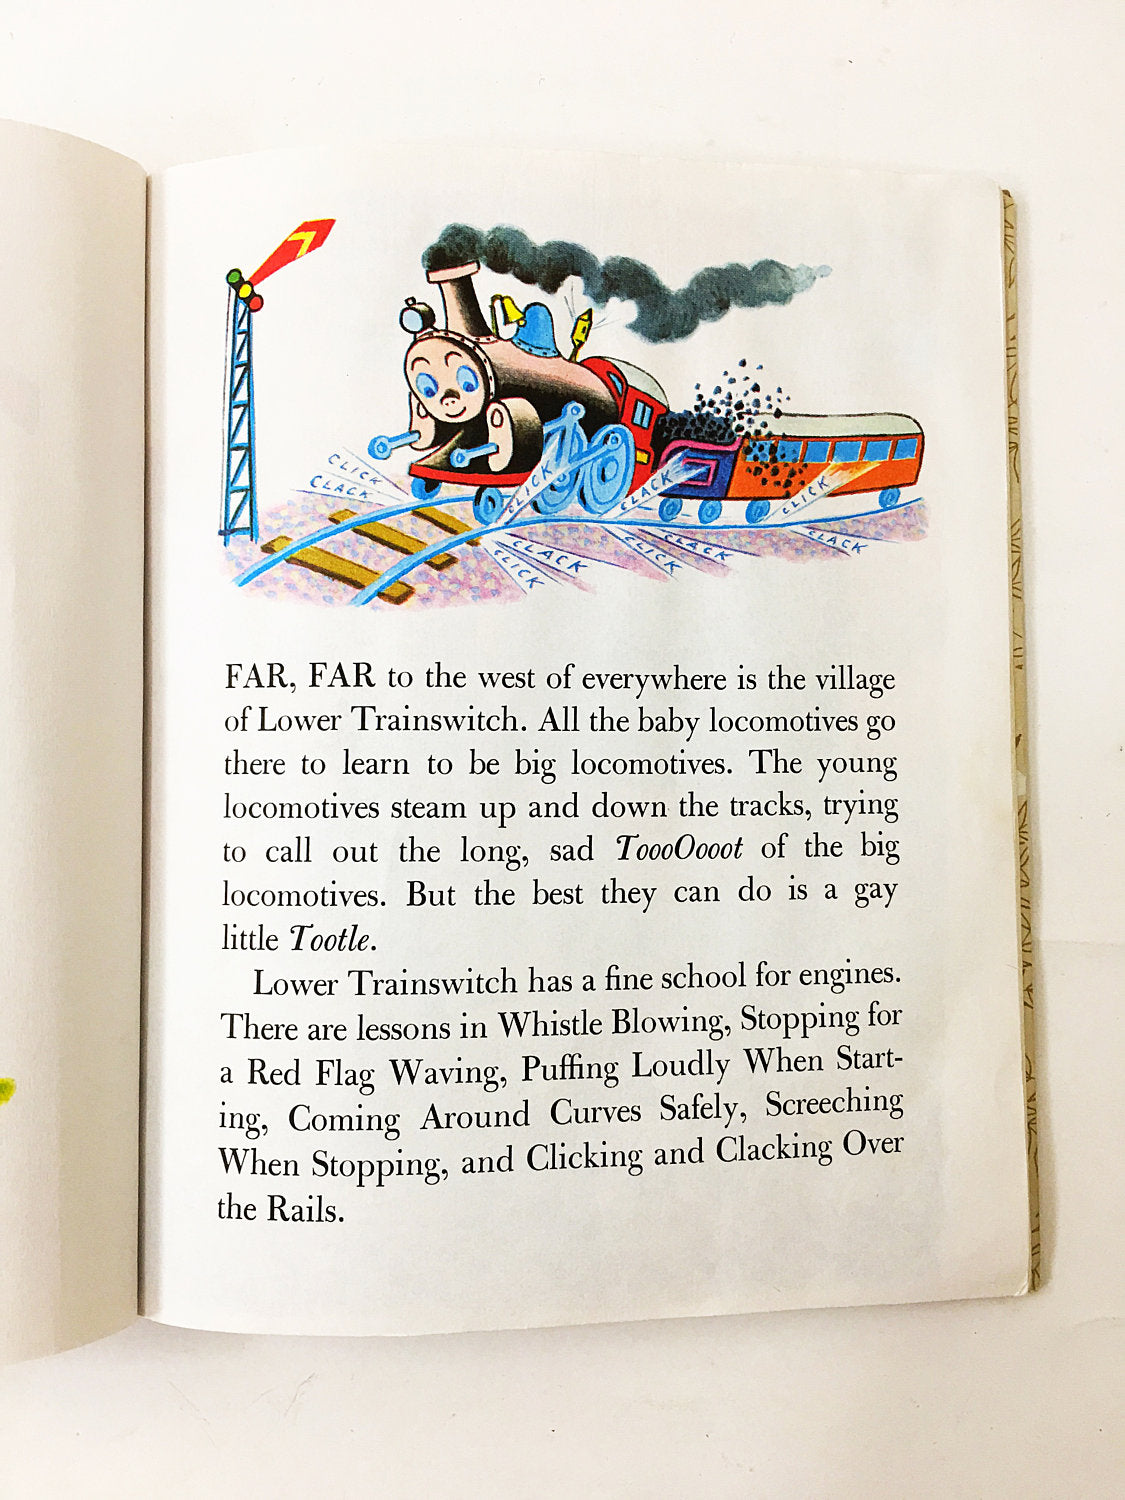 Tootle Vintage Little Golden Book illustrated by Tibor Gergely. Gertrude Crampton circa 1992. Sweet children's train story.